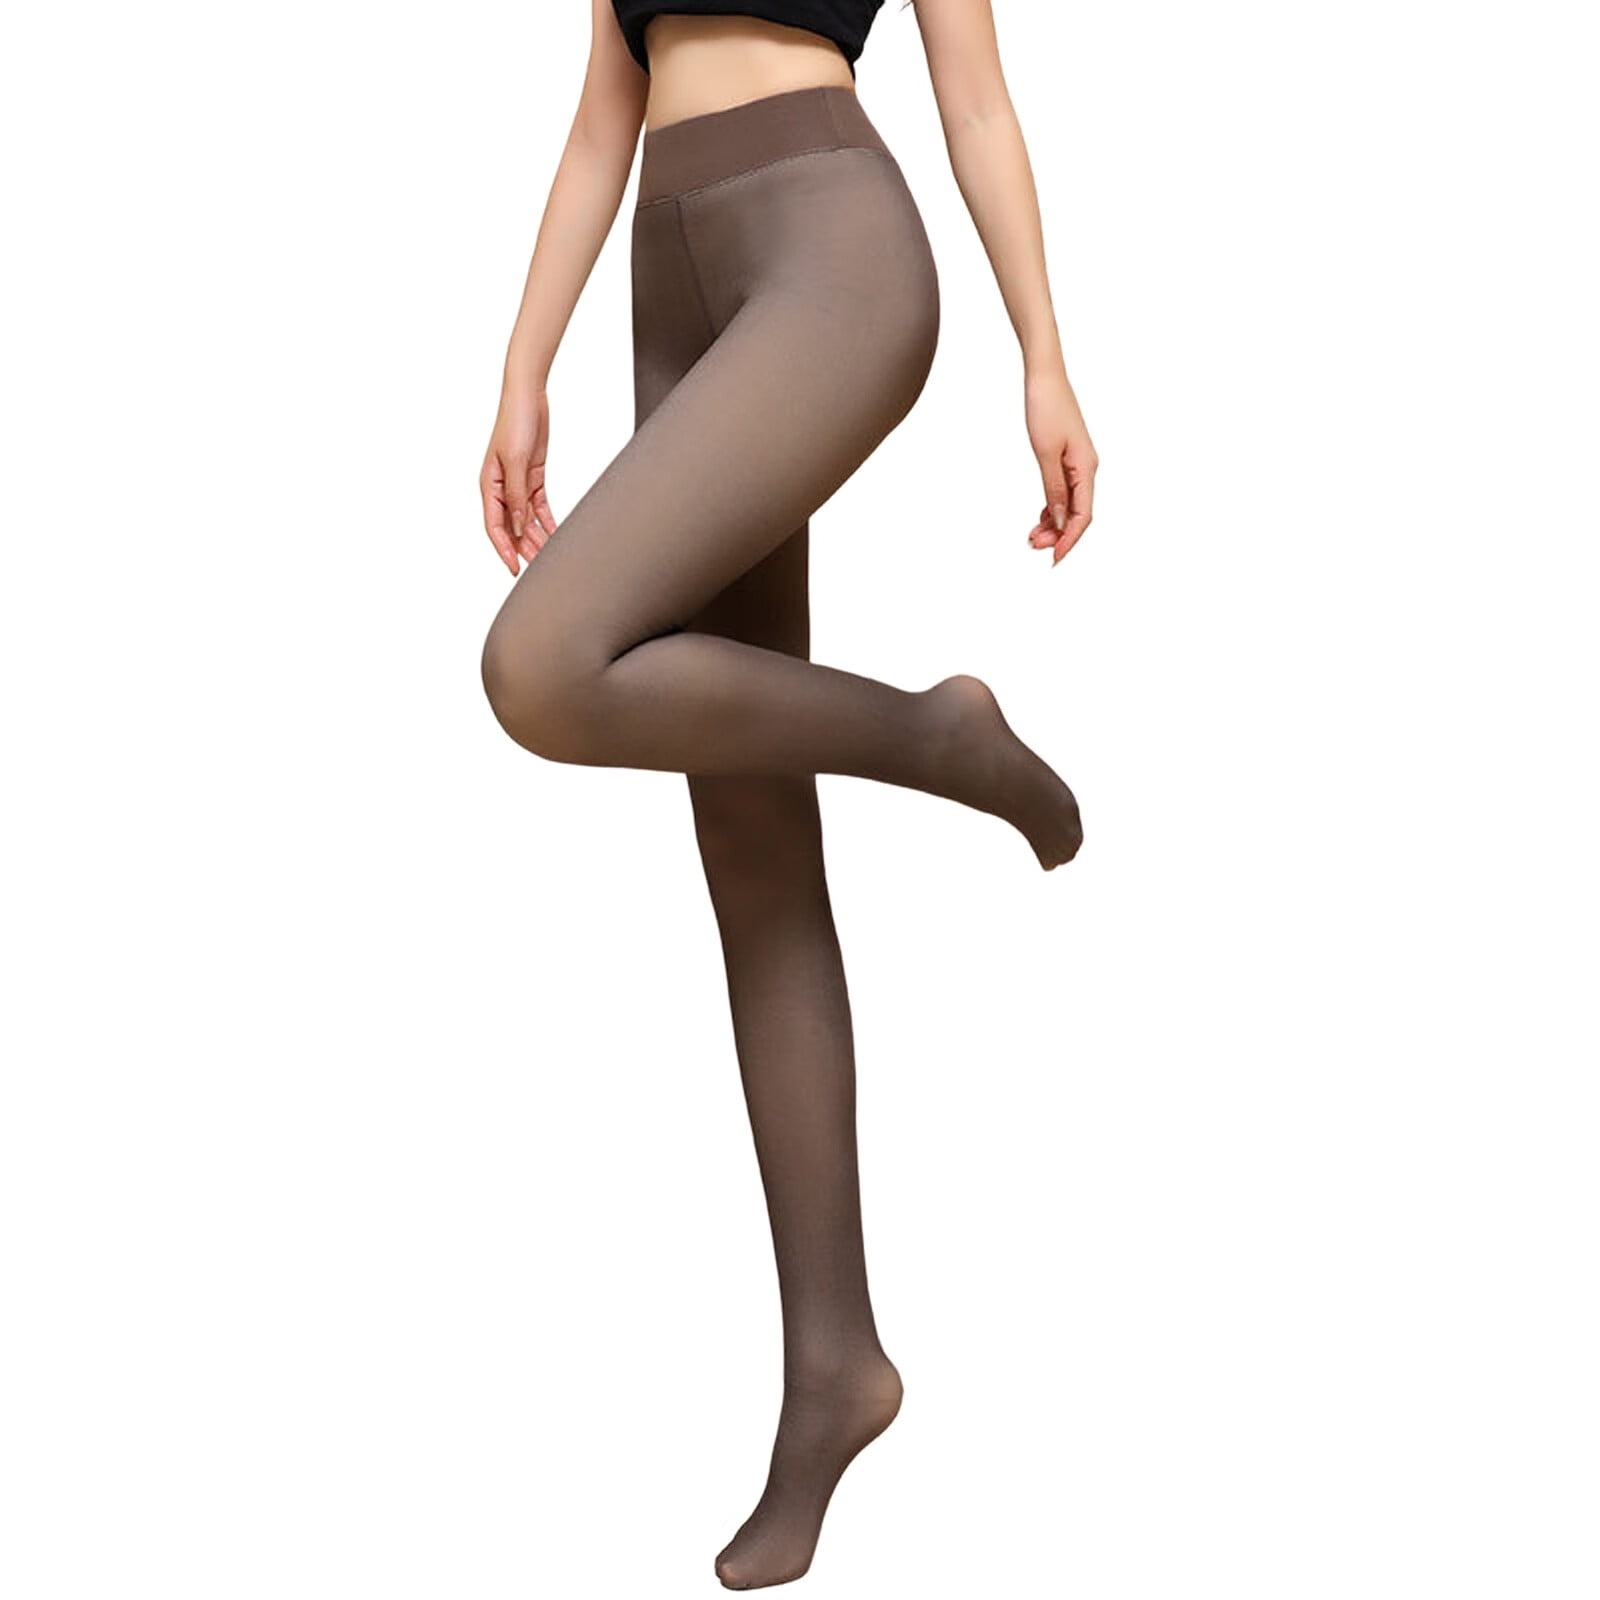 Pantyhose for Women Women Translucent Warm Fleece Pantyhose Fleece Lined  Pantyhose Thermal Winter Tights Sheer Tights 